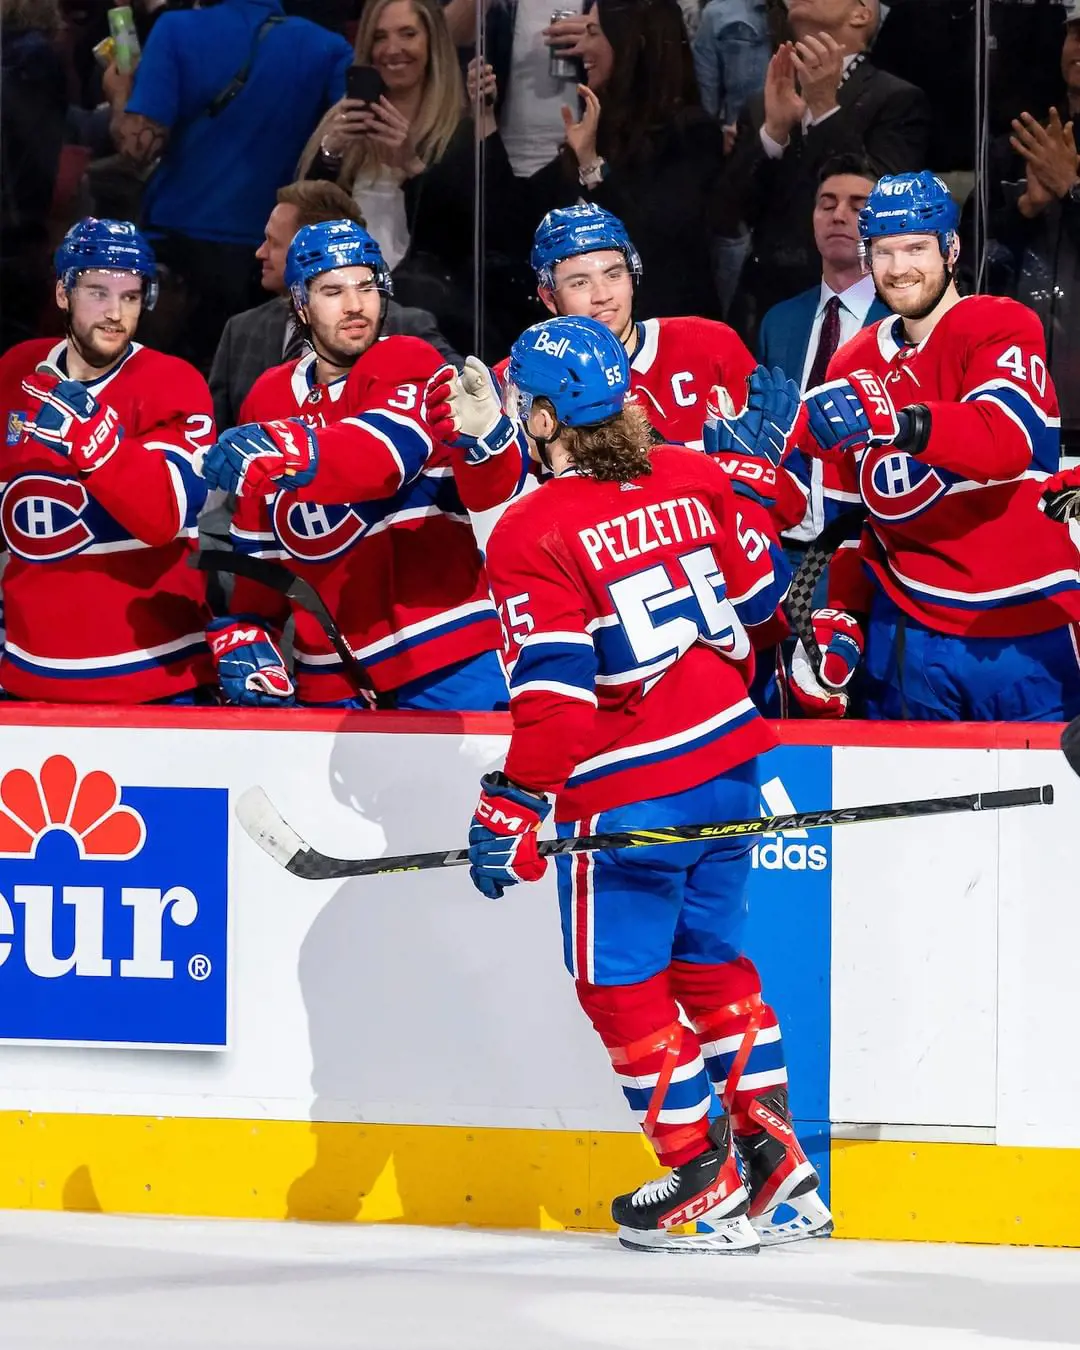 Canadiens Hold The Maximum Number Of The National Hockey League Playoff Titles 